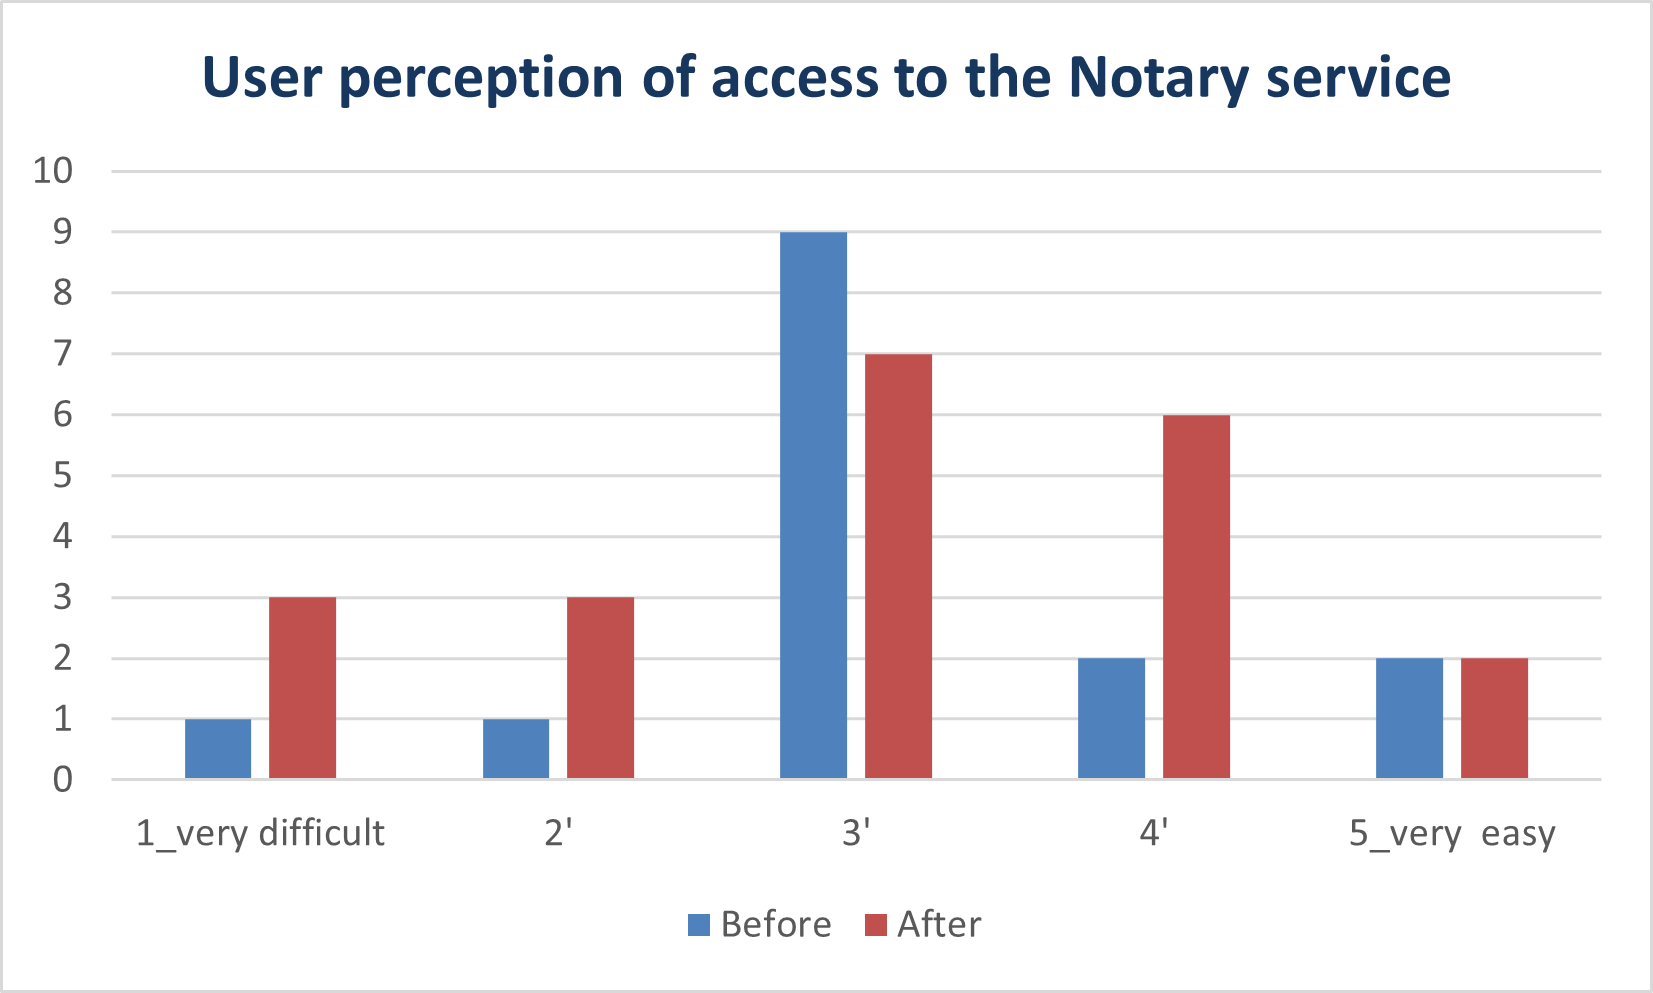 Pre-post  survey results showing user´s perception of access to the Notary